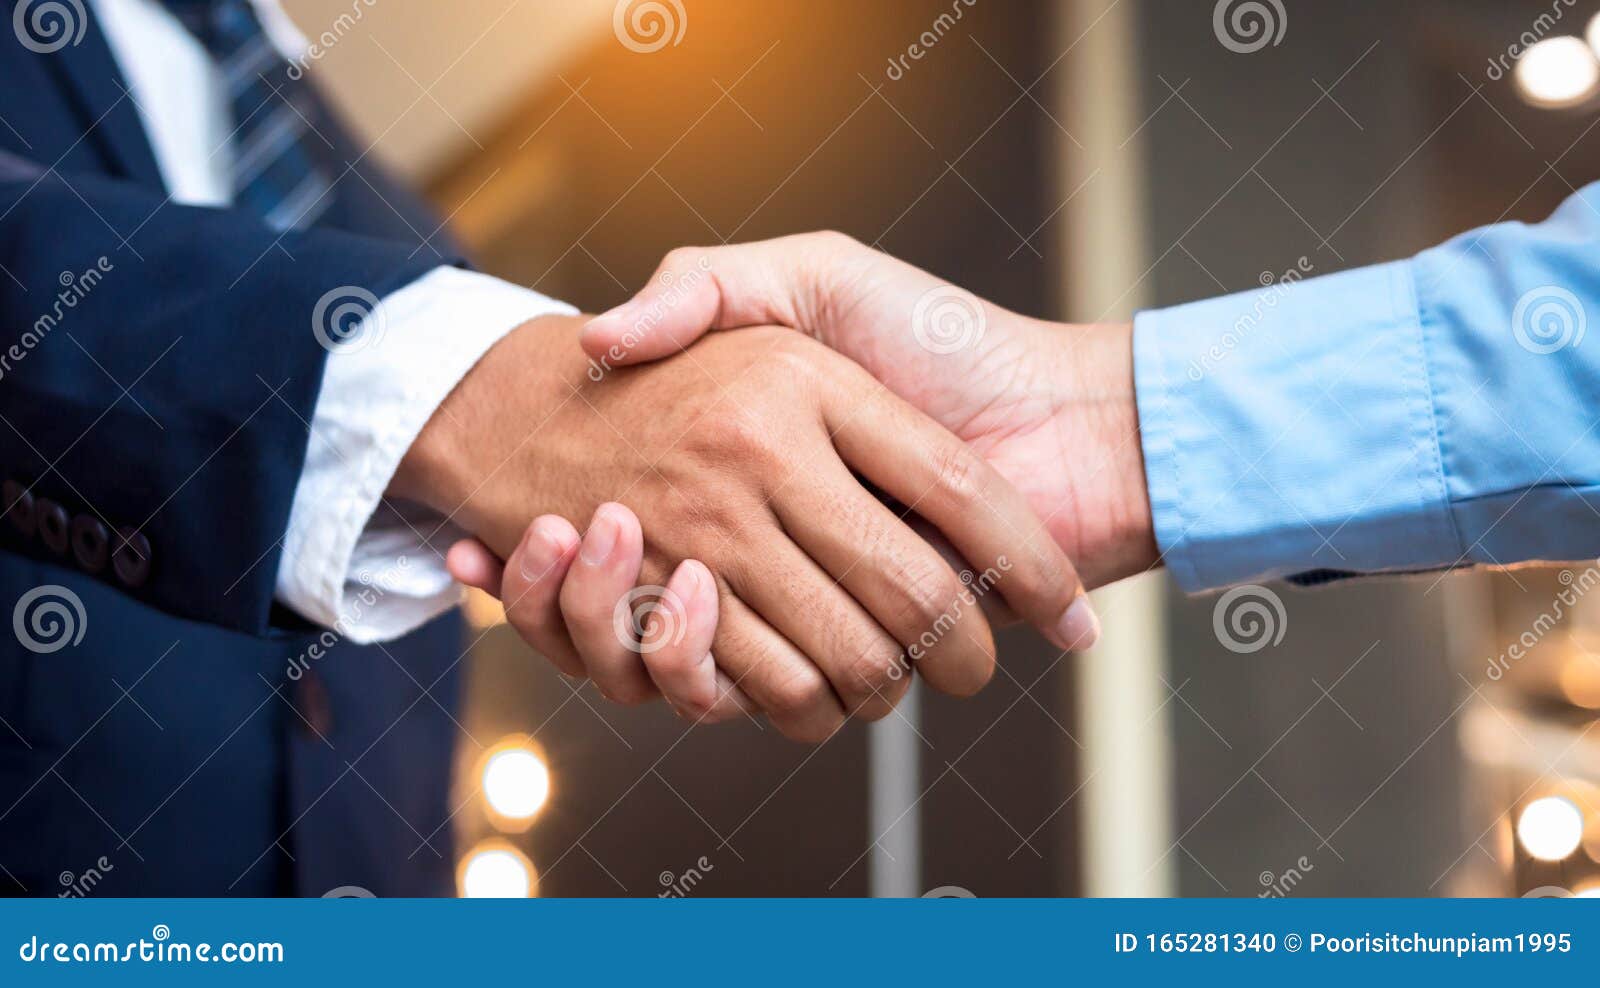 close up businessmen shaking hands during a meeting. handshake deal business corporate